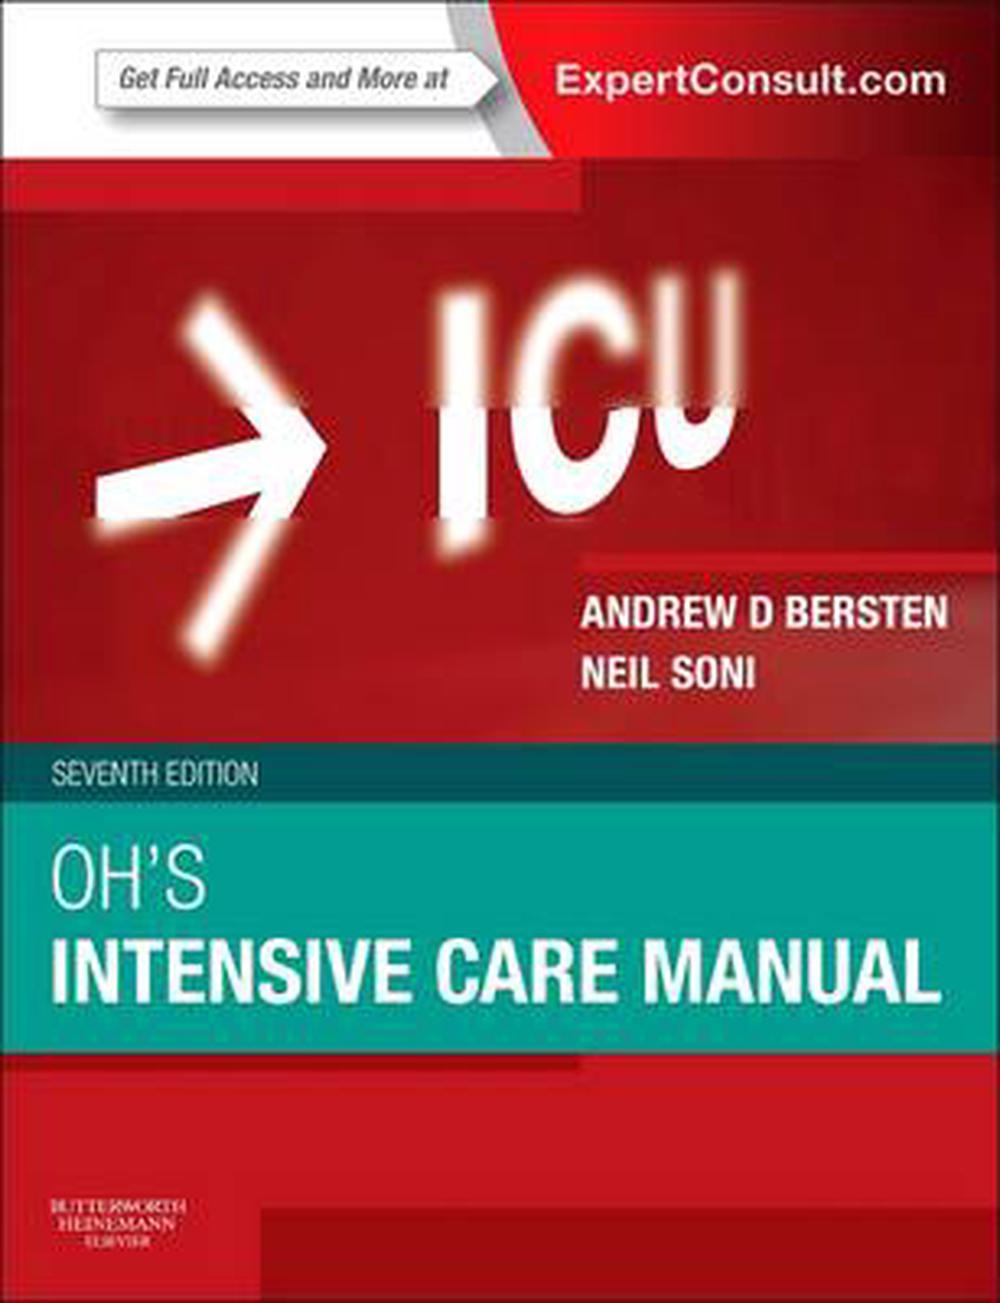 Oh's Intensive Care Manual, 7th Edition by Neil Soni, Paperback, 9780702047626 Buy online at